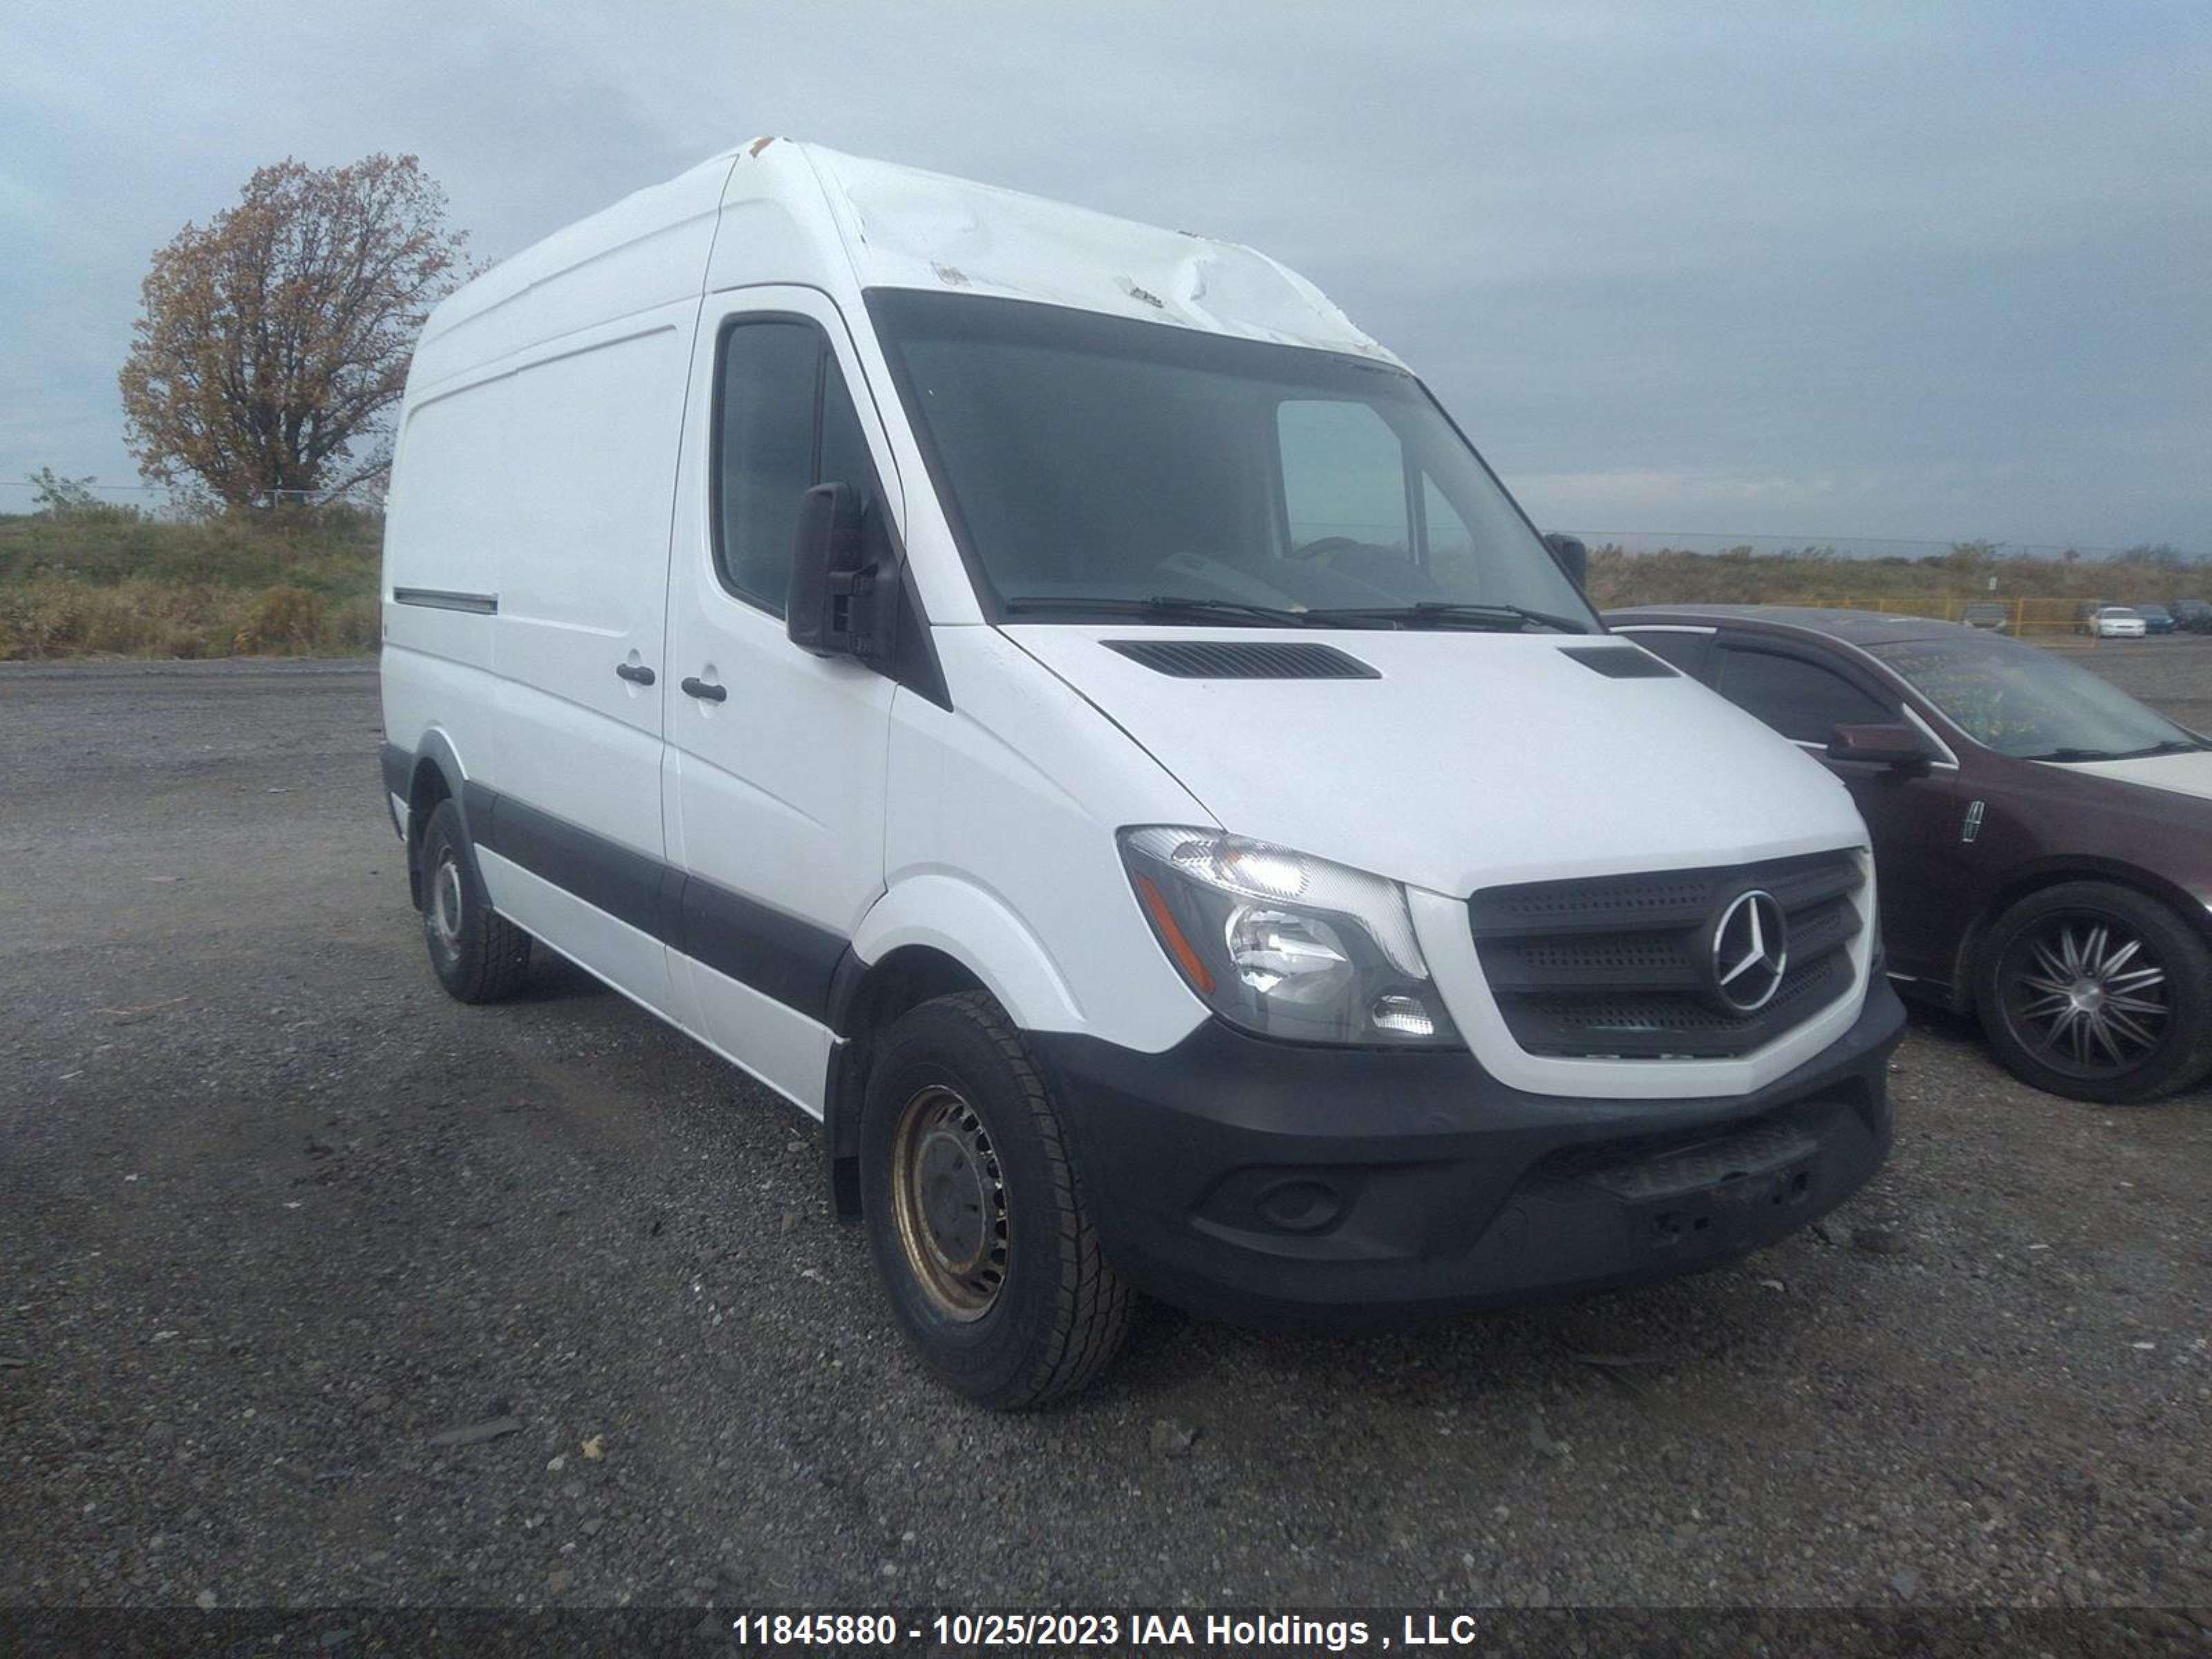 vin: WD3BE7DD1GP351415 WD3BE7DD1GP351415 2016 mercedes-benz sprinter 2100 for Sale in l8j3b8, 721 Mud St E , Stoney Creek, Ontario, USA